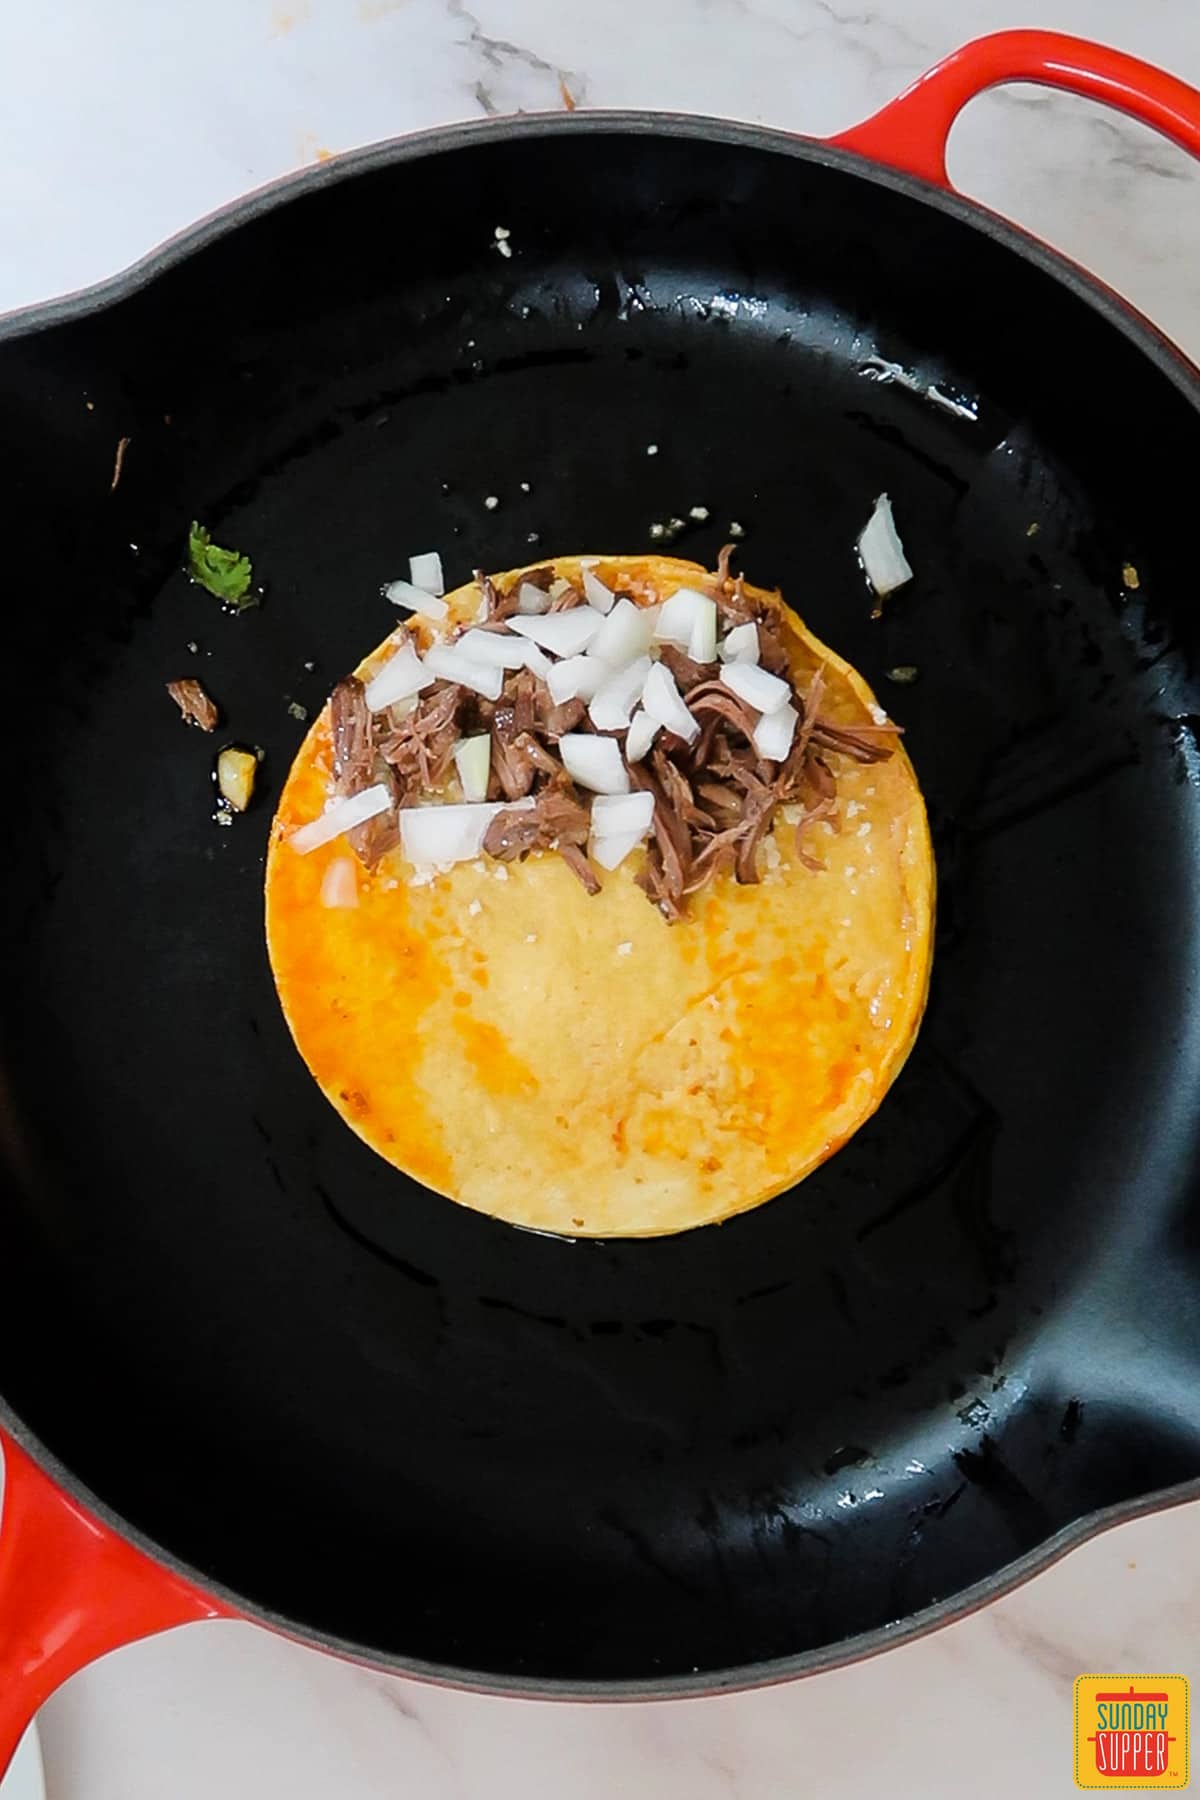 a black frying pan with an unfolded quesabirria taco filled with beef, cheese and onions in the center